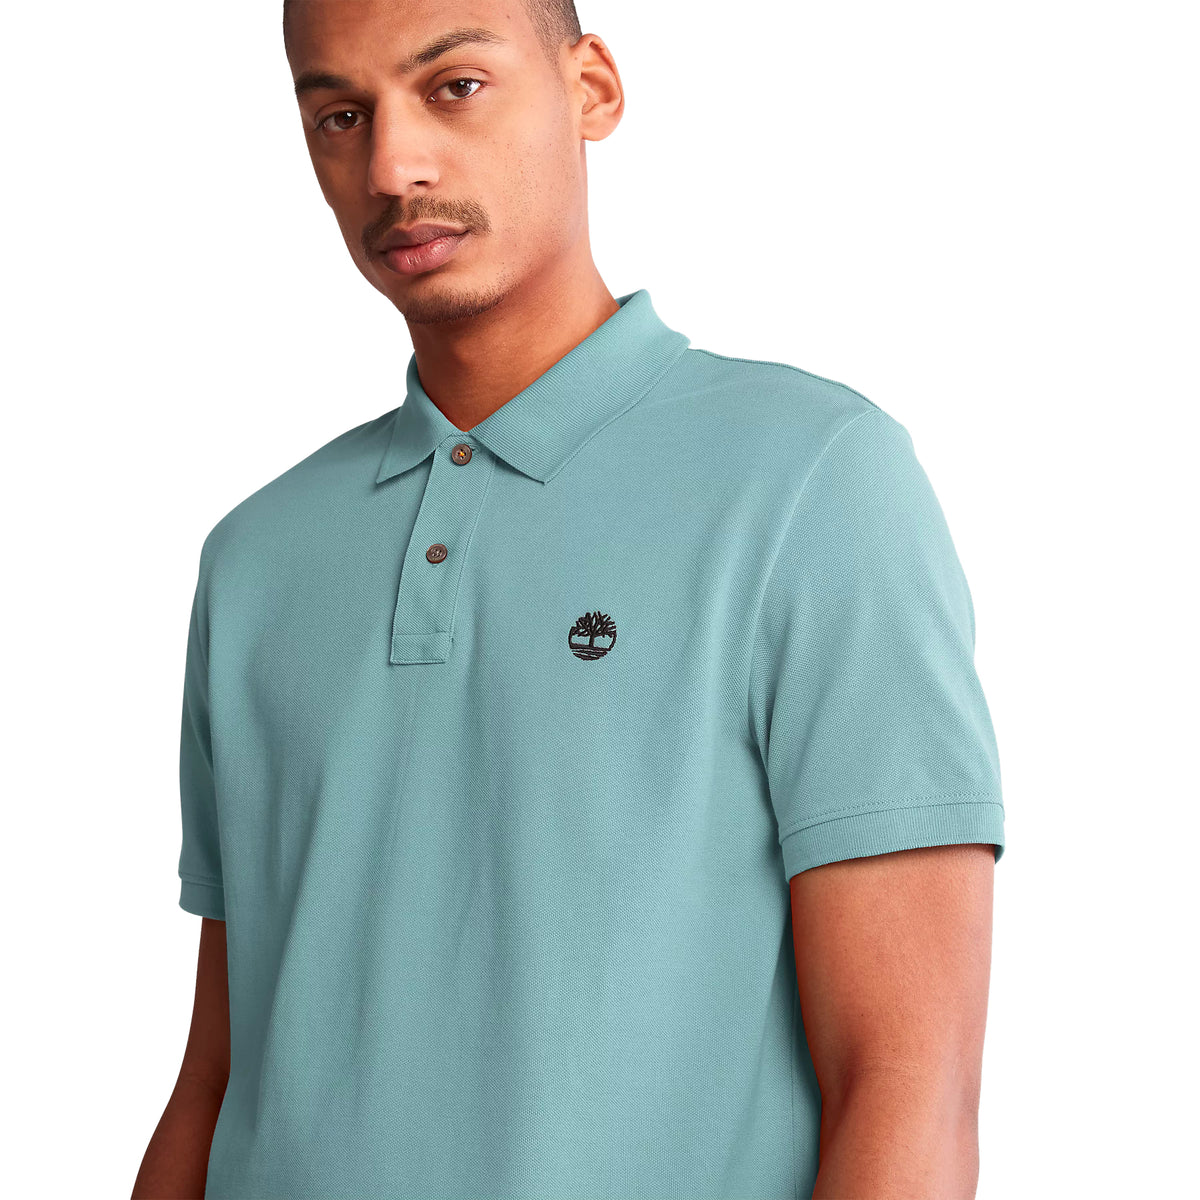 Timberland Mens Millers River Pique Polo T-Shirt - Short Sleeved, 05, Tb0A26N4, #colour_Mineral Blue